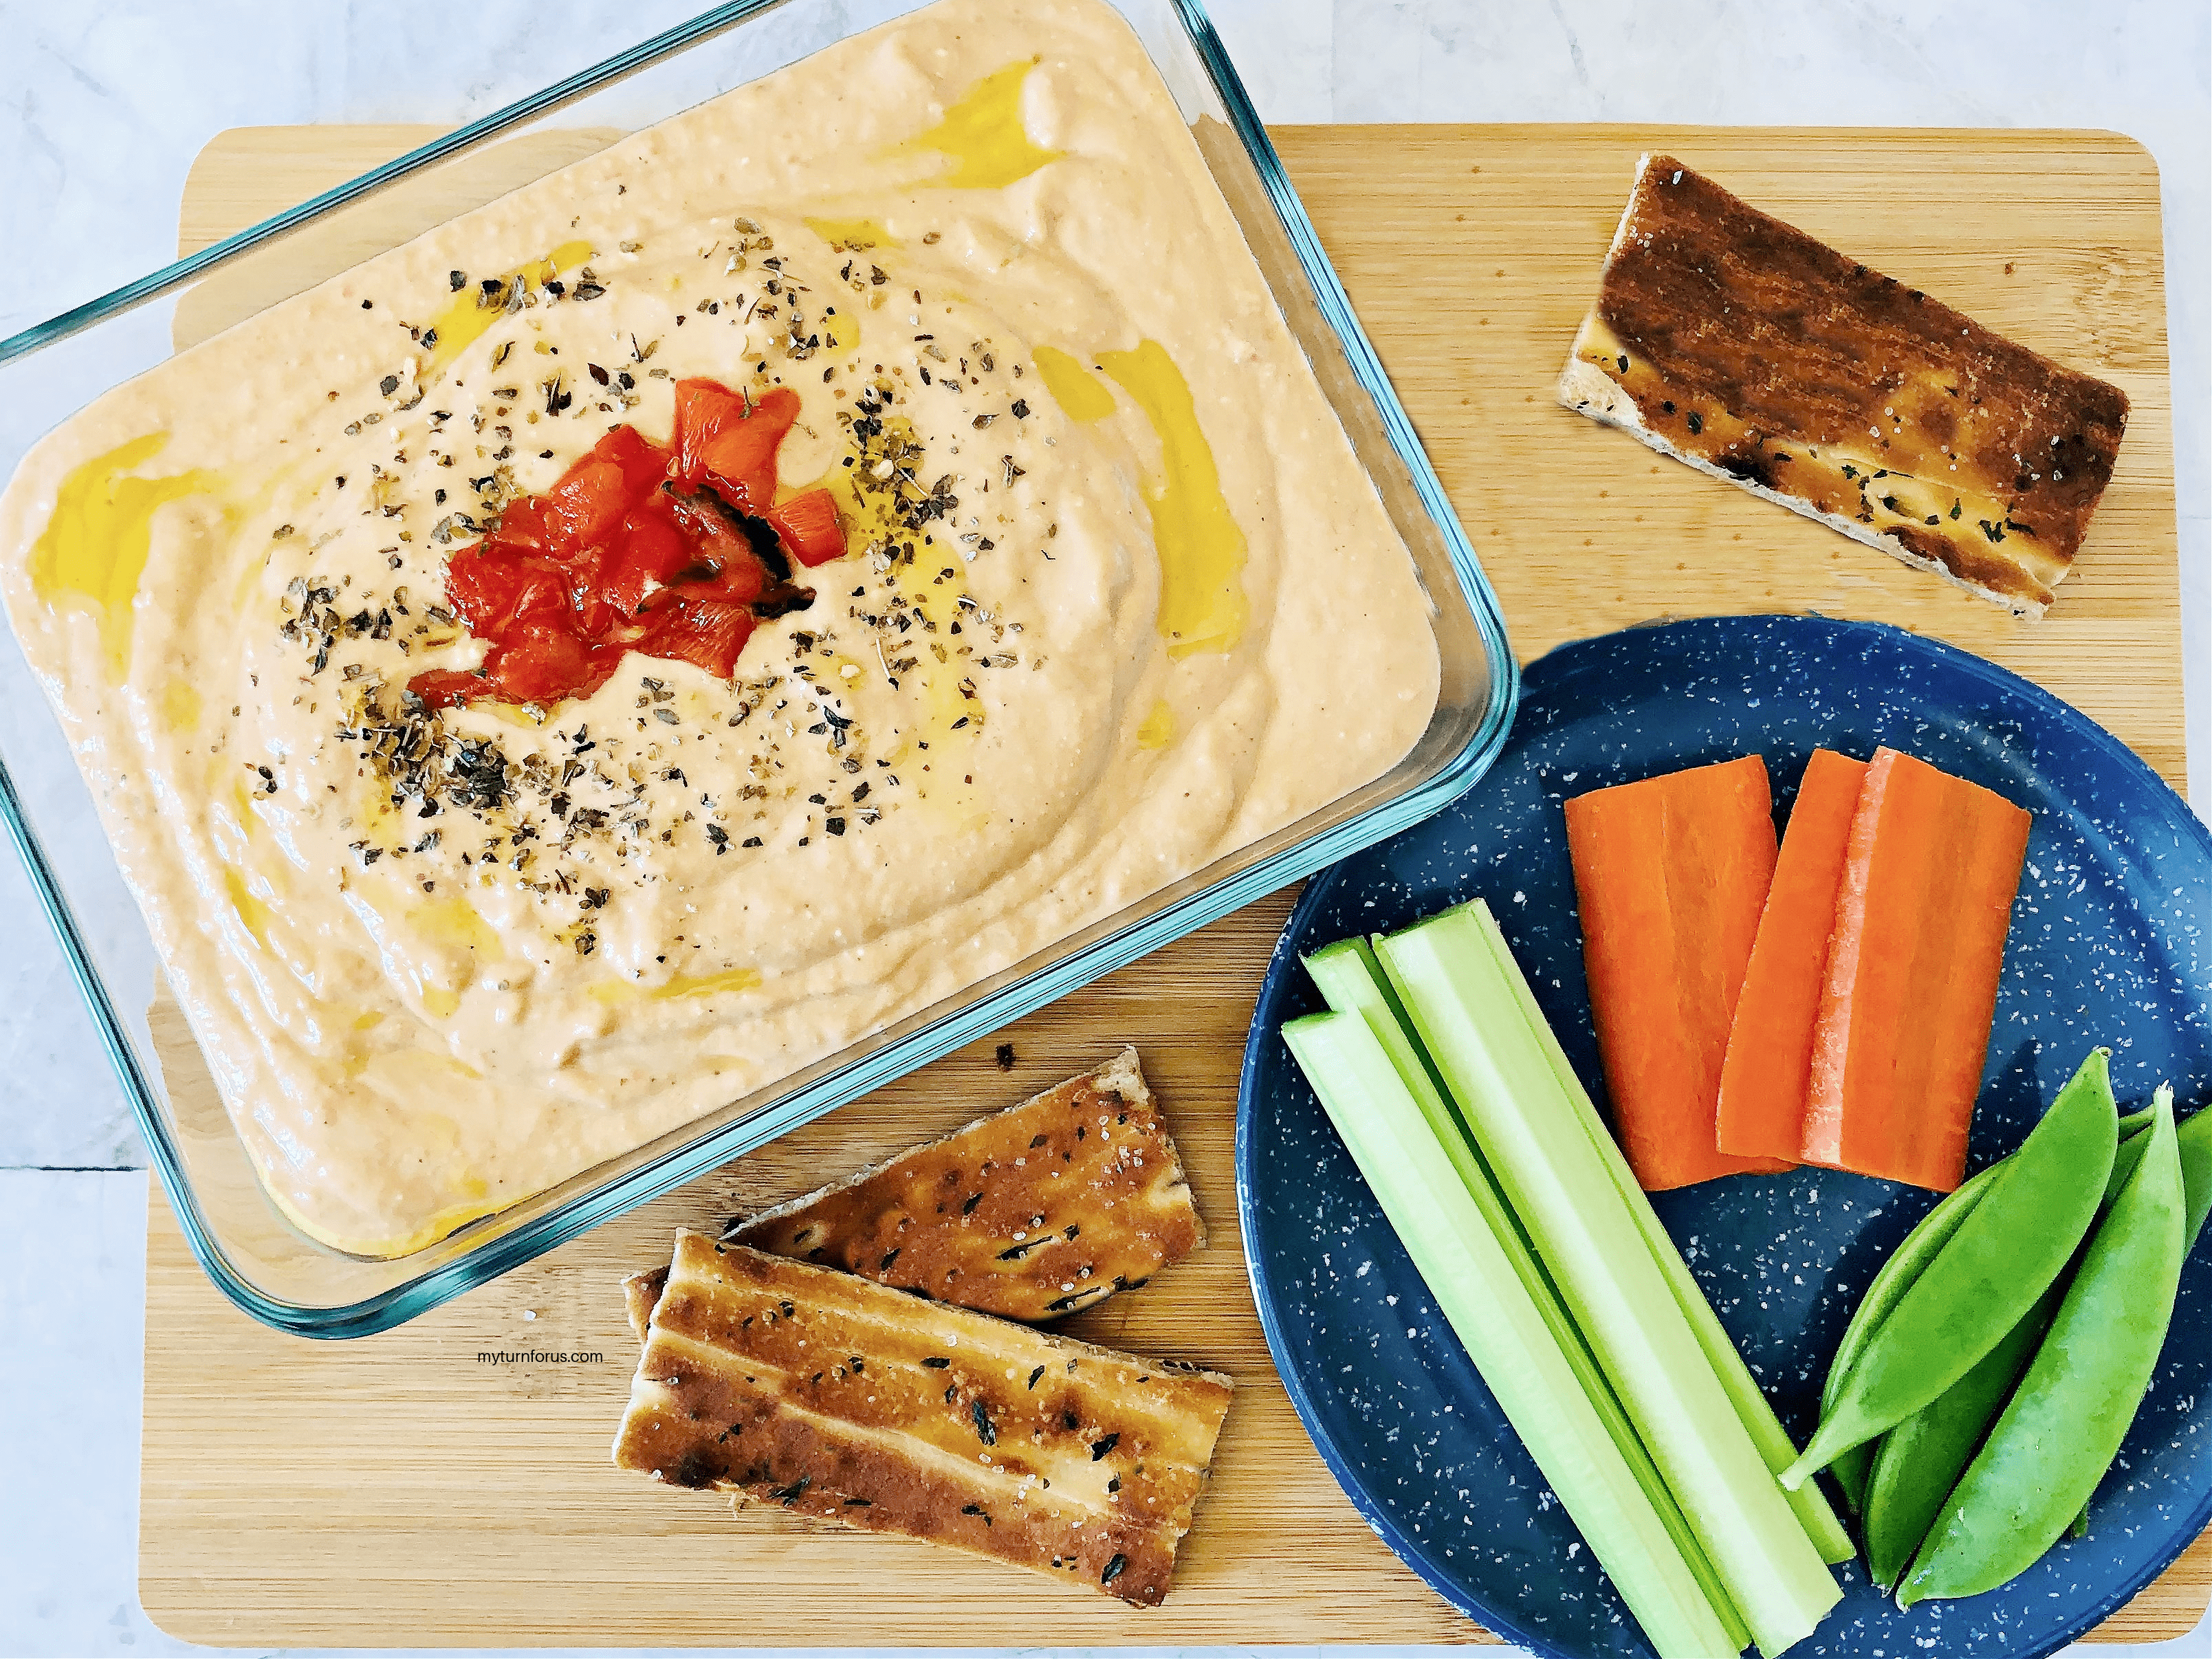 roasted red pepper & feta hummus and what you can eat with hummus like carrots, celery, pita and peas